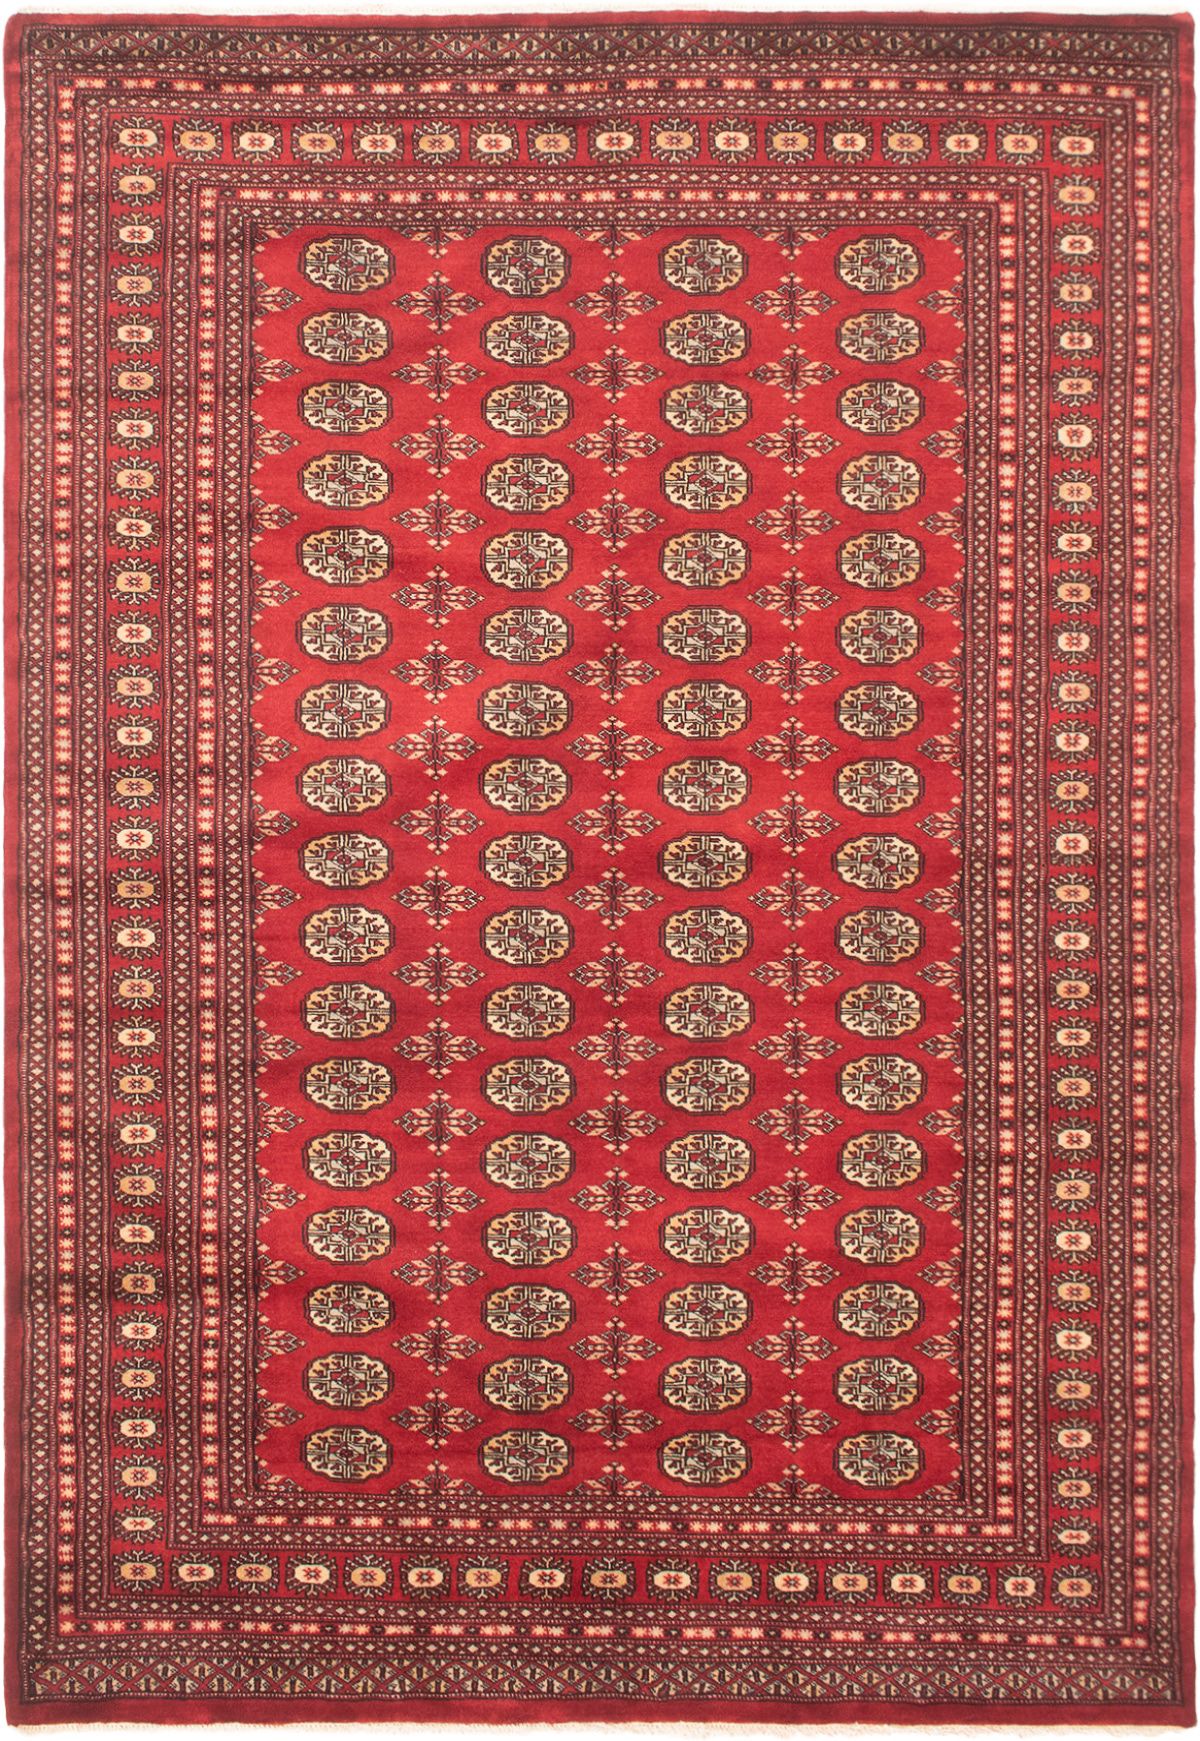 Hand-knotted Finest Peshawar Bokhara Red Wool Rug 6'1" x 8'10" Size: 6'1" x 8'10"  